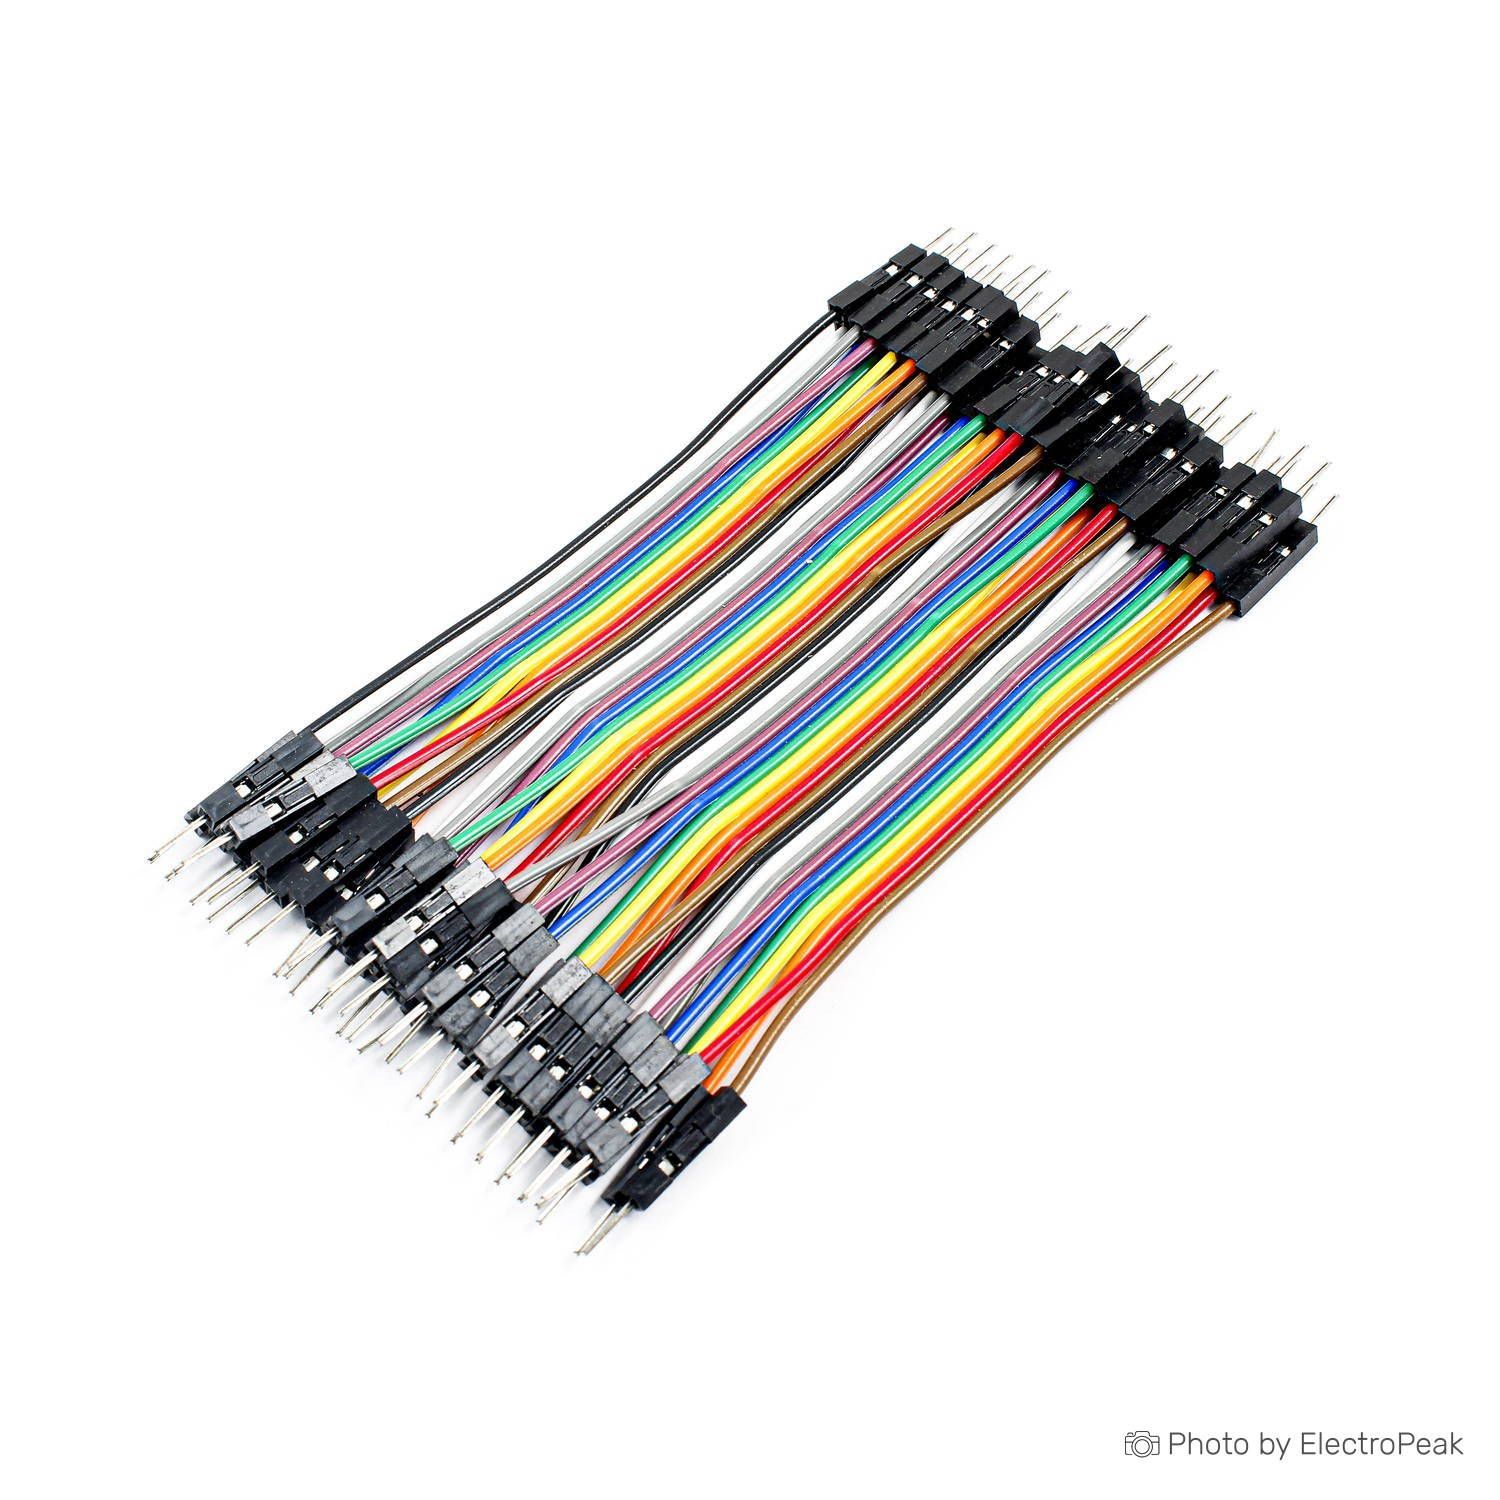 Jumper Cable Male to Male 15cm - 40pcs Colorful Dupont Wires for Electronics